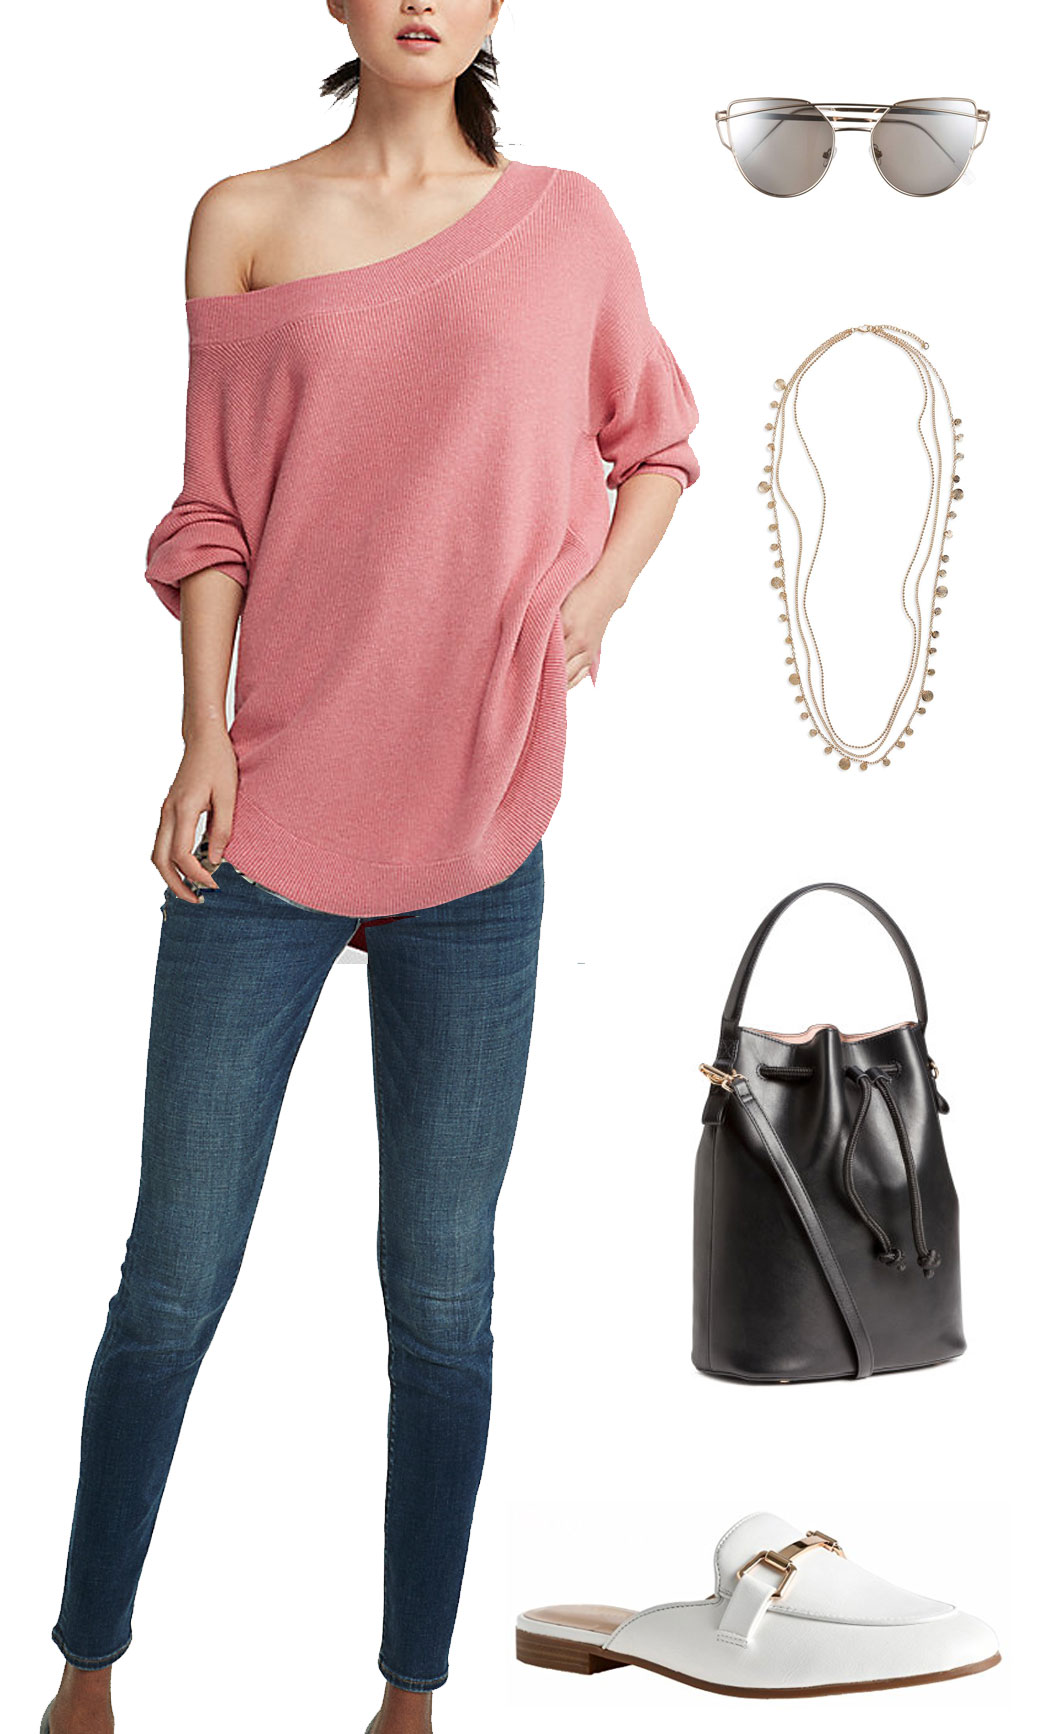 Alessandra Ambrosio wears a coral dolman sweater with skinny jeans and white mules.